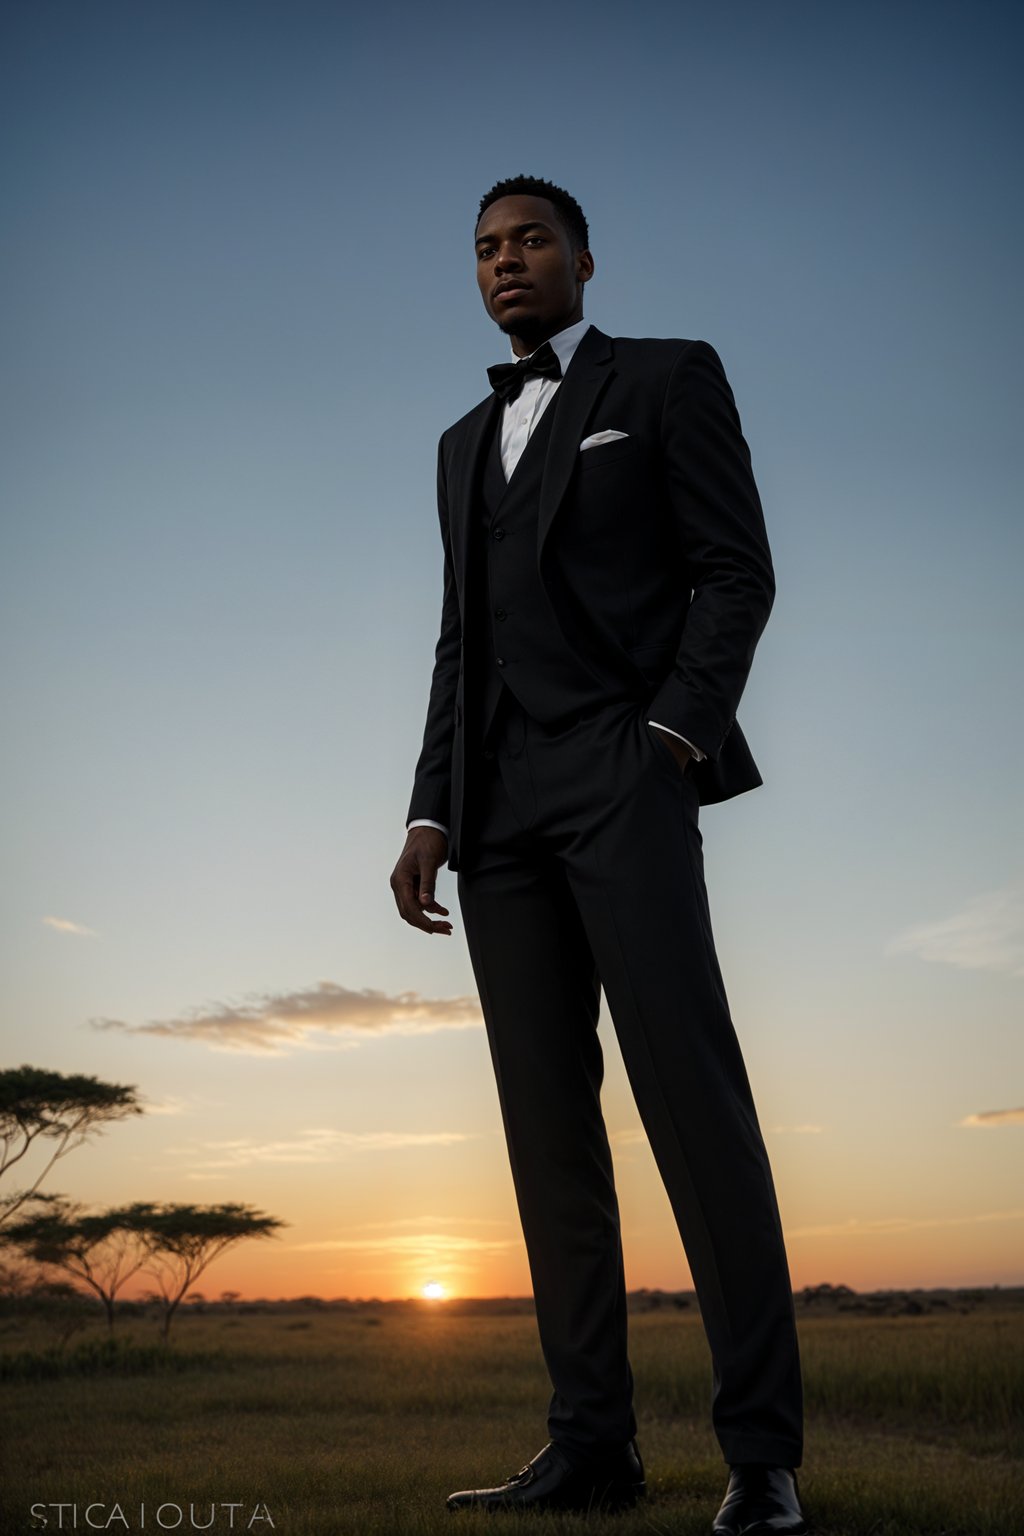 man in  dapper suit, radiating allure under the soft glow of a sunset